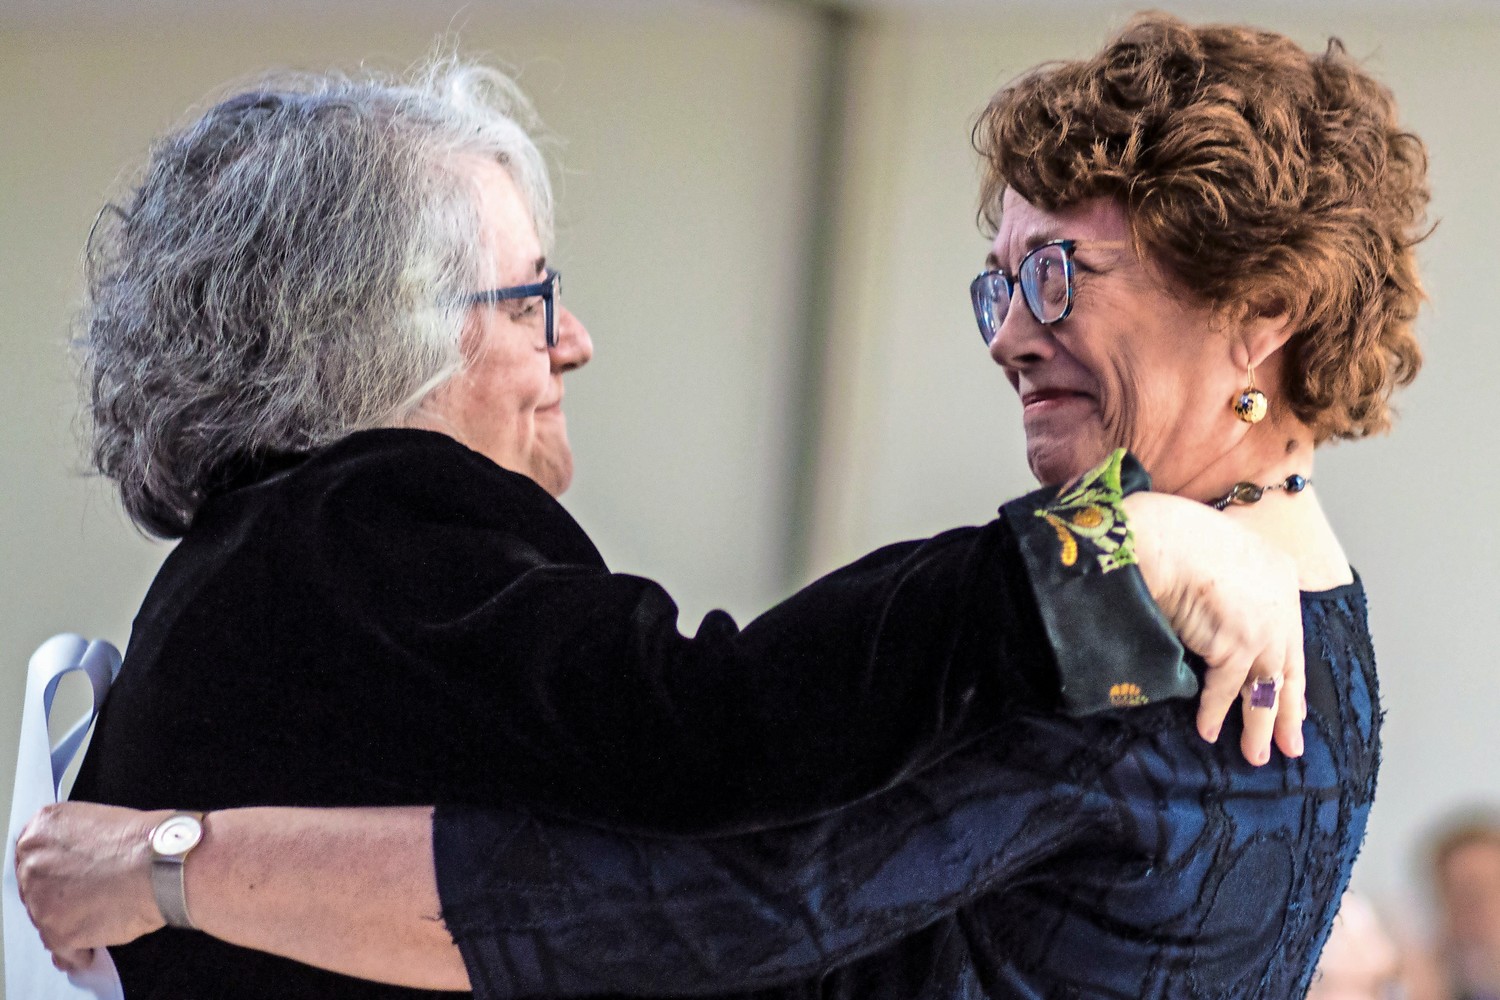 Rabbi Linda Shriner-Cahn, left, embraces Madeline Ritter, who spearheaded the search that installed Shriner-Cahn as the rabbi for Congregation Tehillah in 2008. For her 10 years of service, Shriner-Cahn and her husband David were honored during the congregation's 2018 annual gala at The Riverdale Y on Feb. 3.